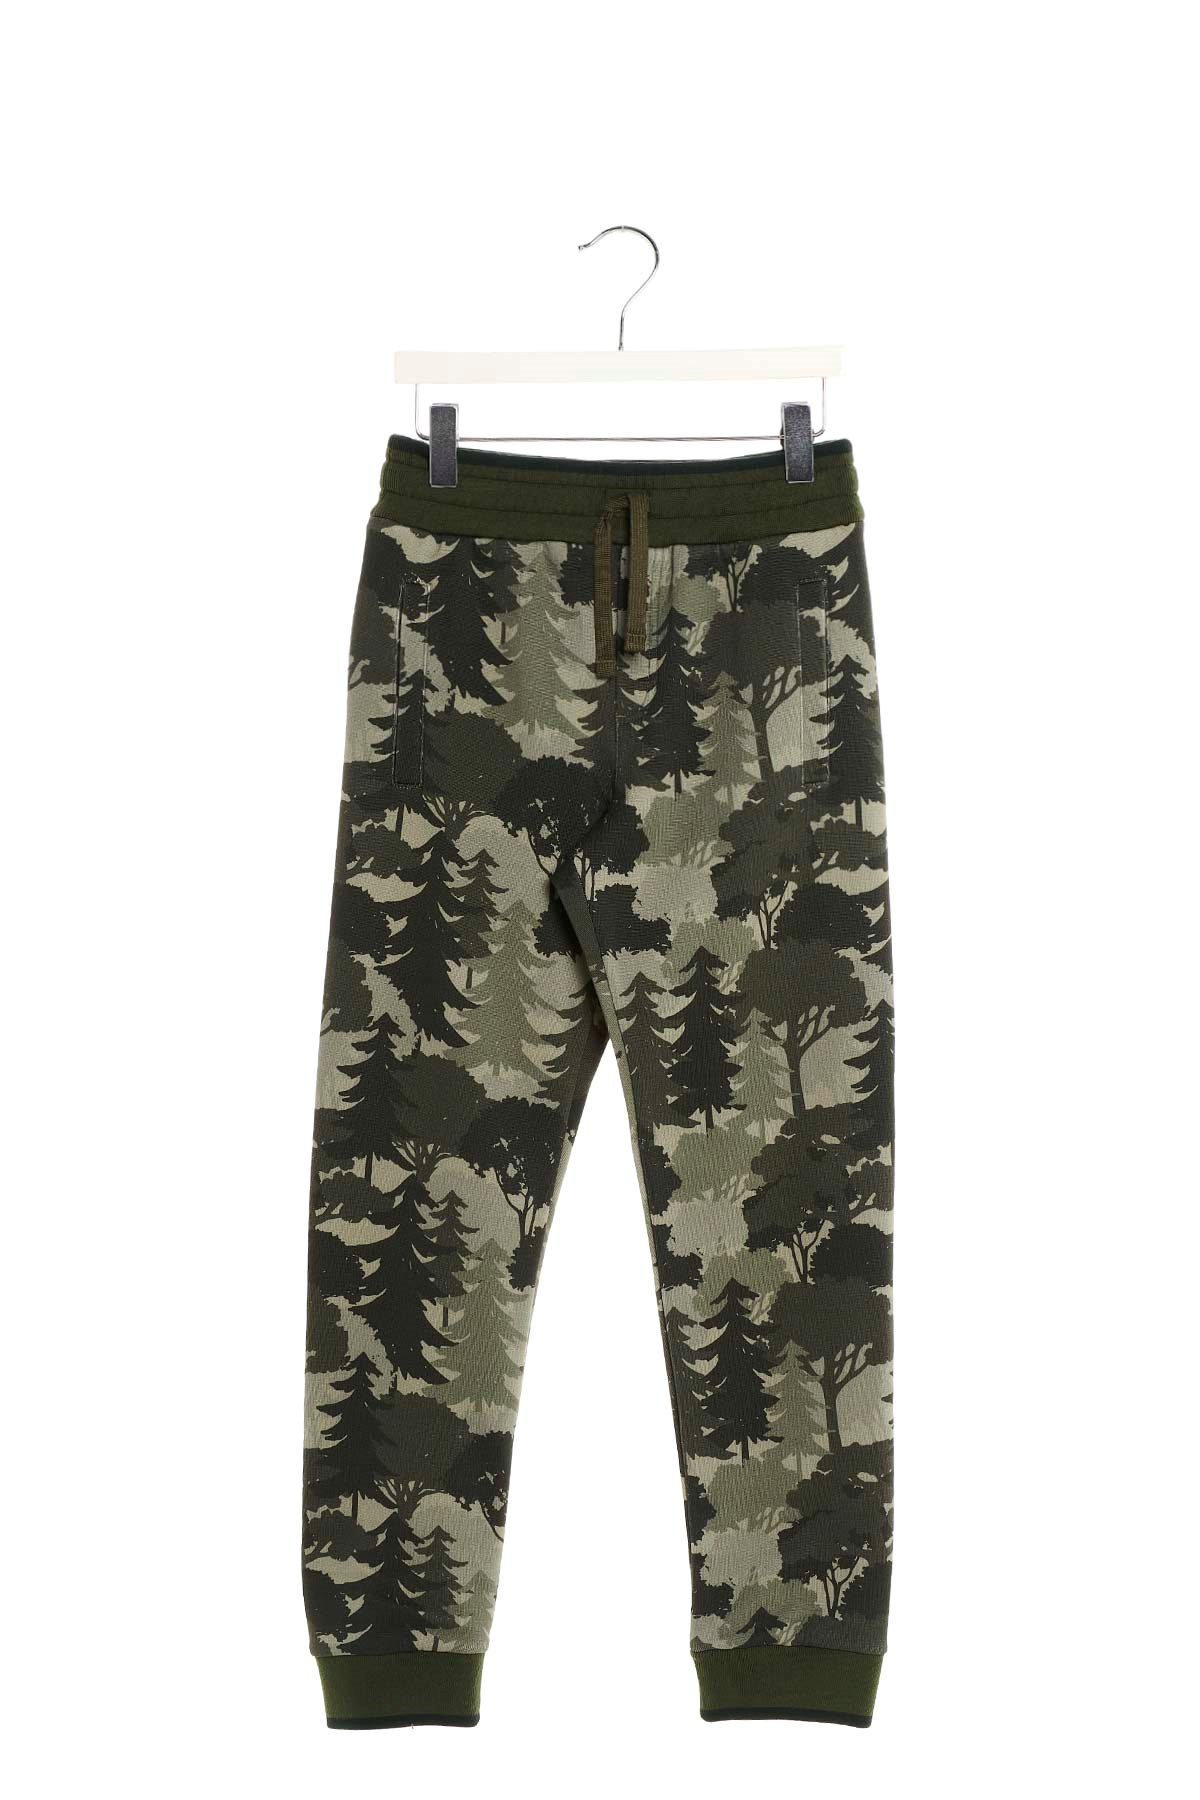 DOLCE & GABBANA All Over Printed Trees Sweatpants